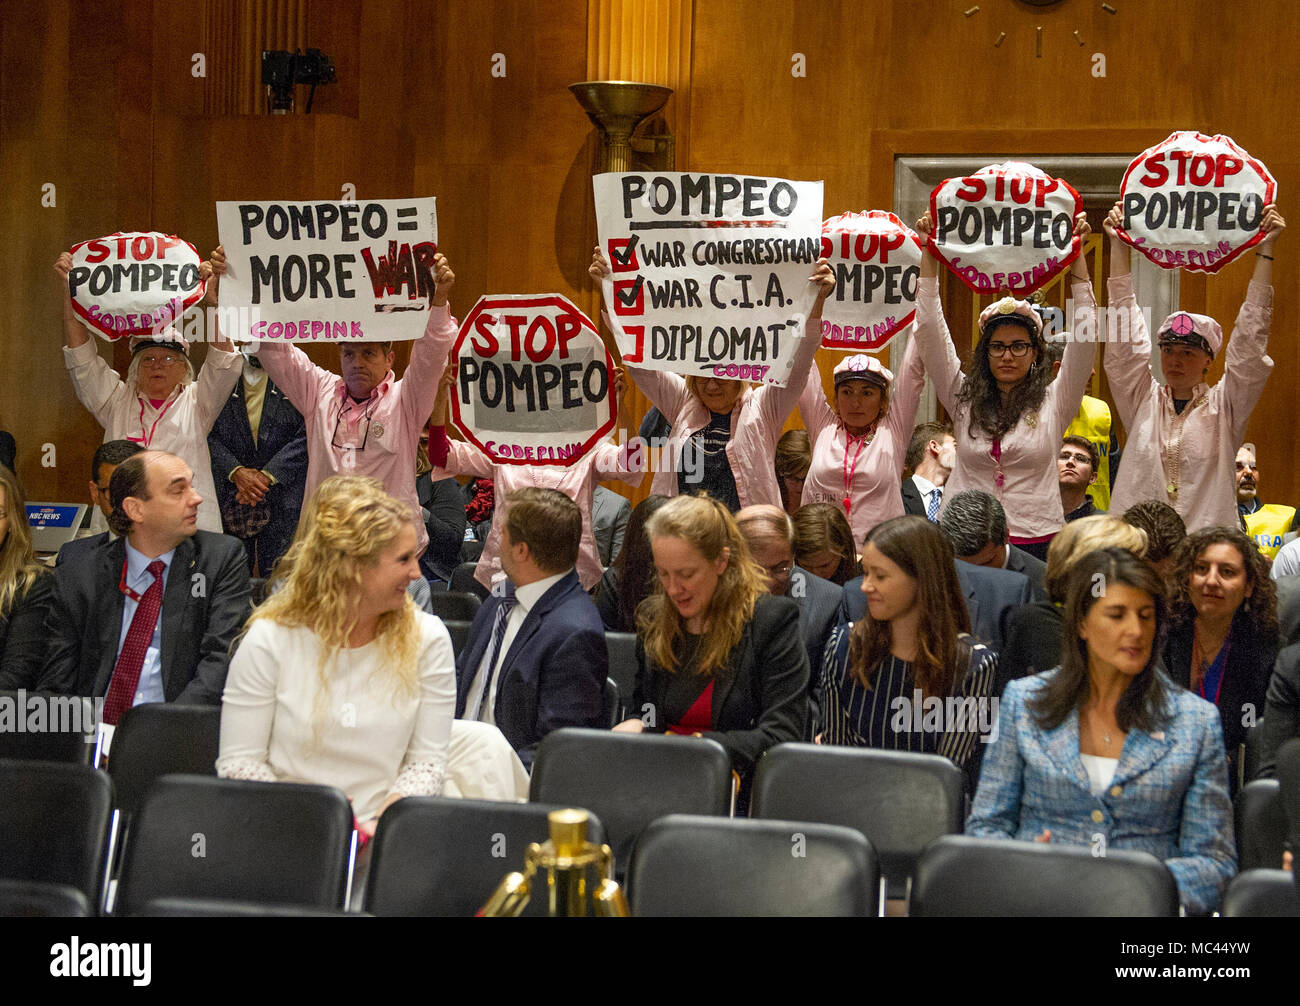 Protestors hold up signs prior to the arrival of CIA Director Mike Pompeo, who will testify on his nomination to be United States Secretary of State before the US Senate Committee on Foreign Relations on Capitol Hill in Washington, DC on Thursday, April 12, 2018. Credit: Ron Sachs/CNP /MediaPunch Stock Photo